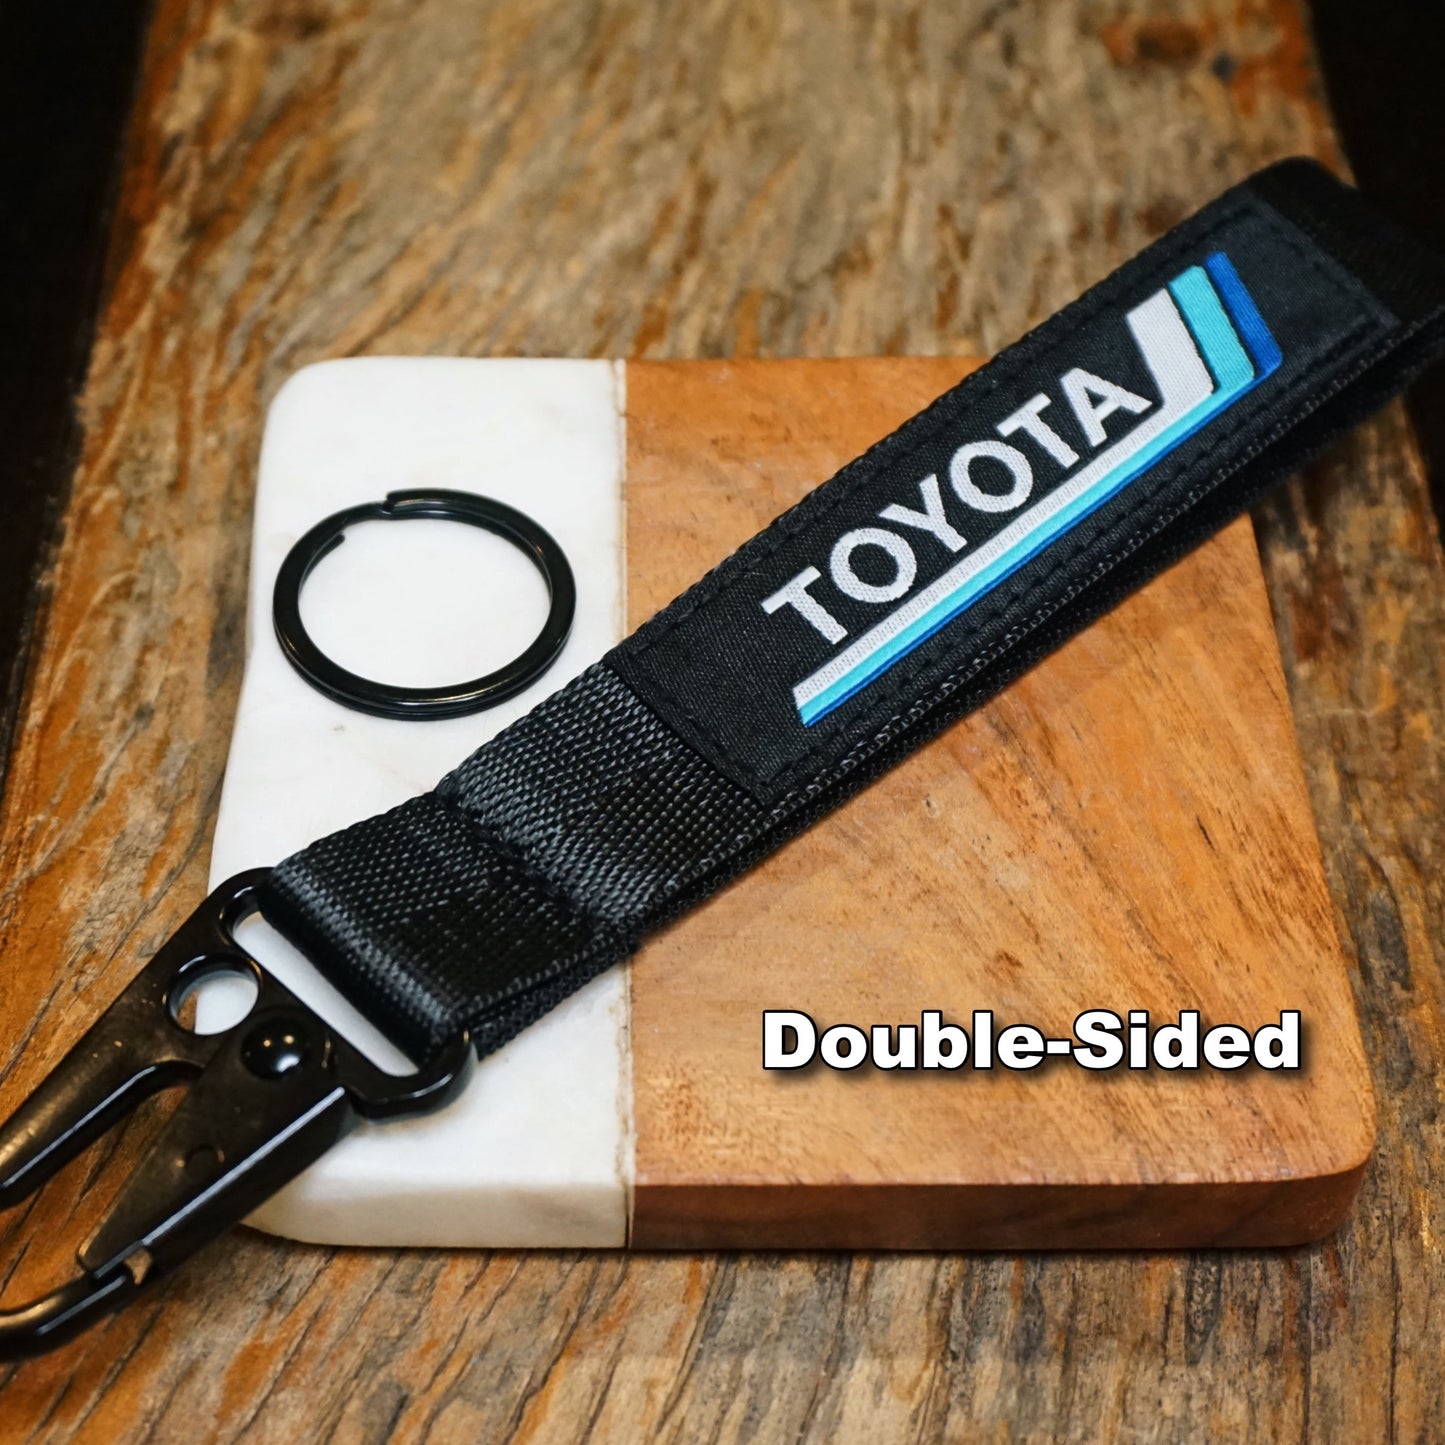 Blue Vintage Heritage Stripes Keychain for Toyota, Metal Clip-On Accessory